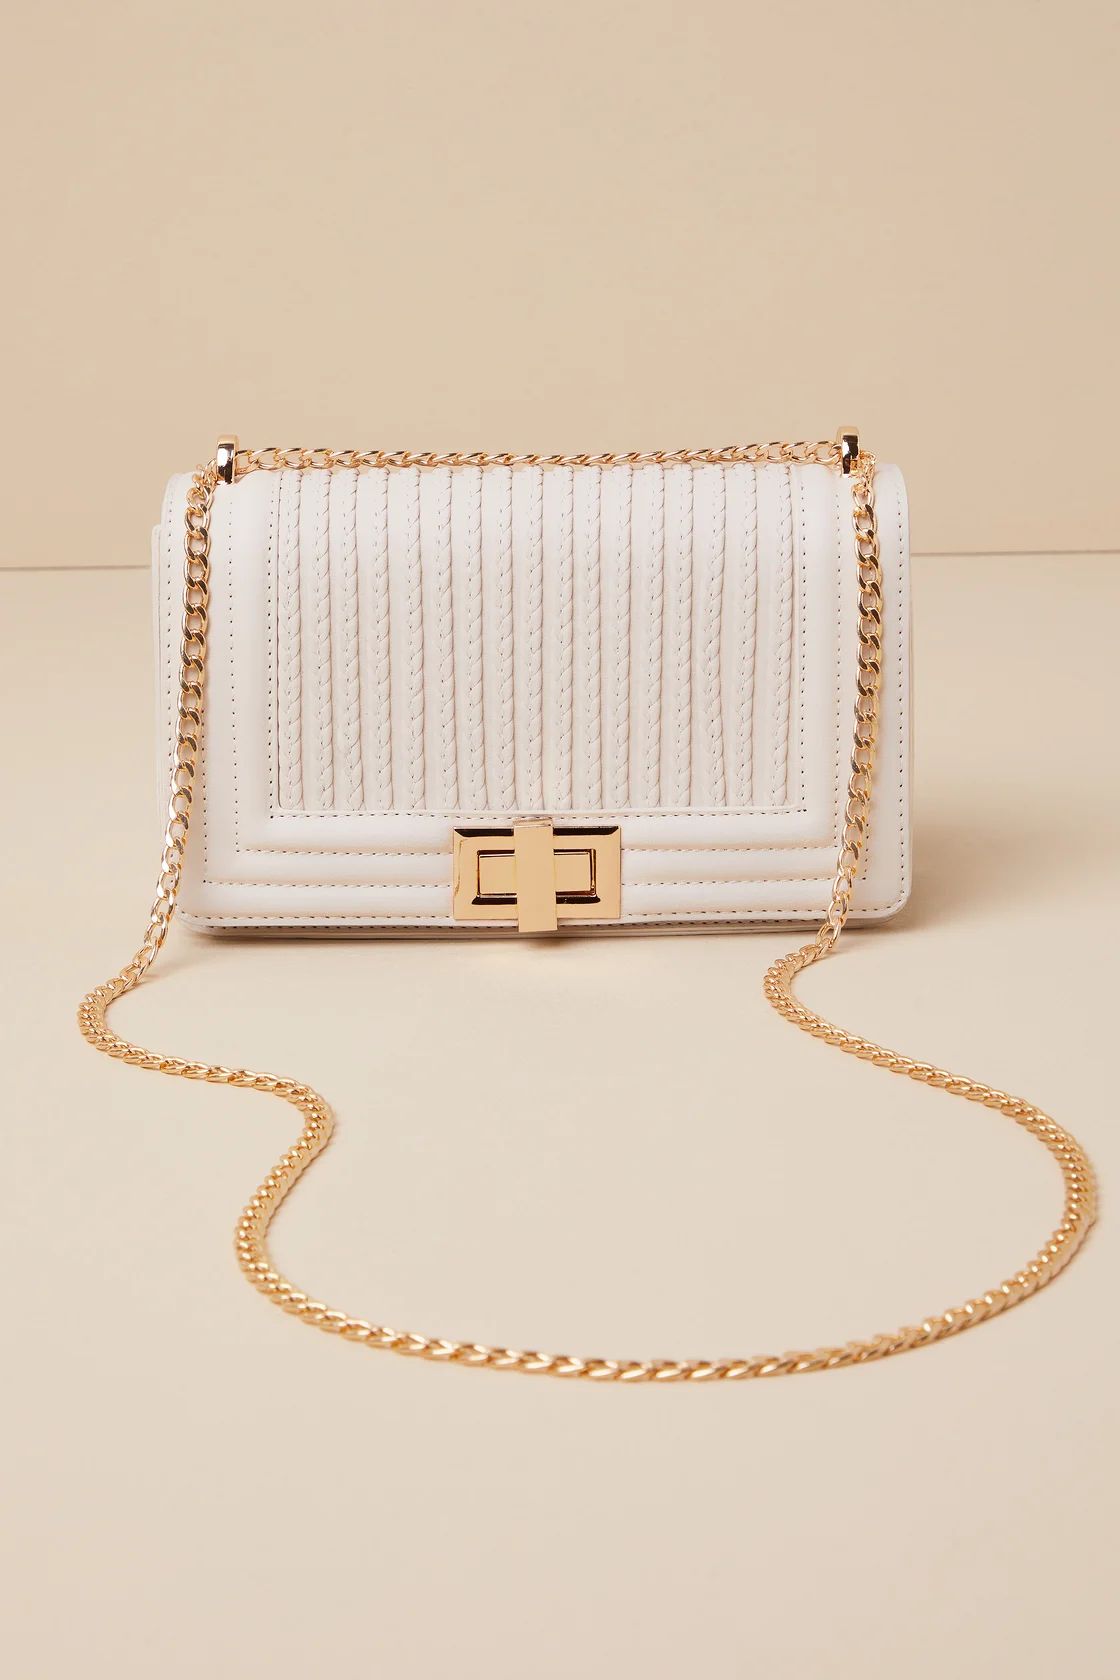 Let's Go Out Later Bone Braided Crossbody Bag | Lulus